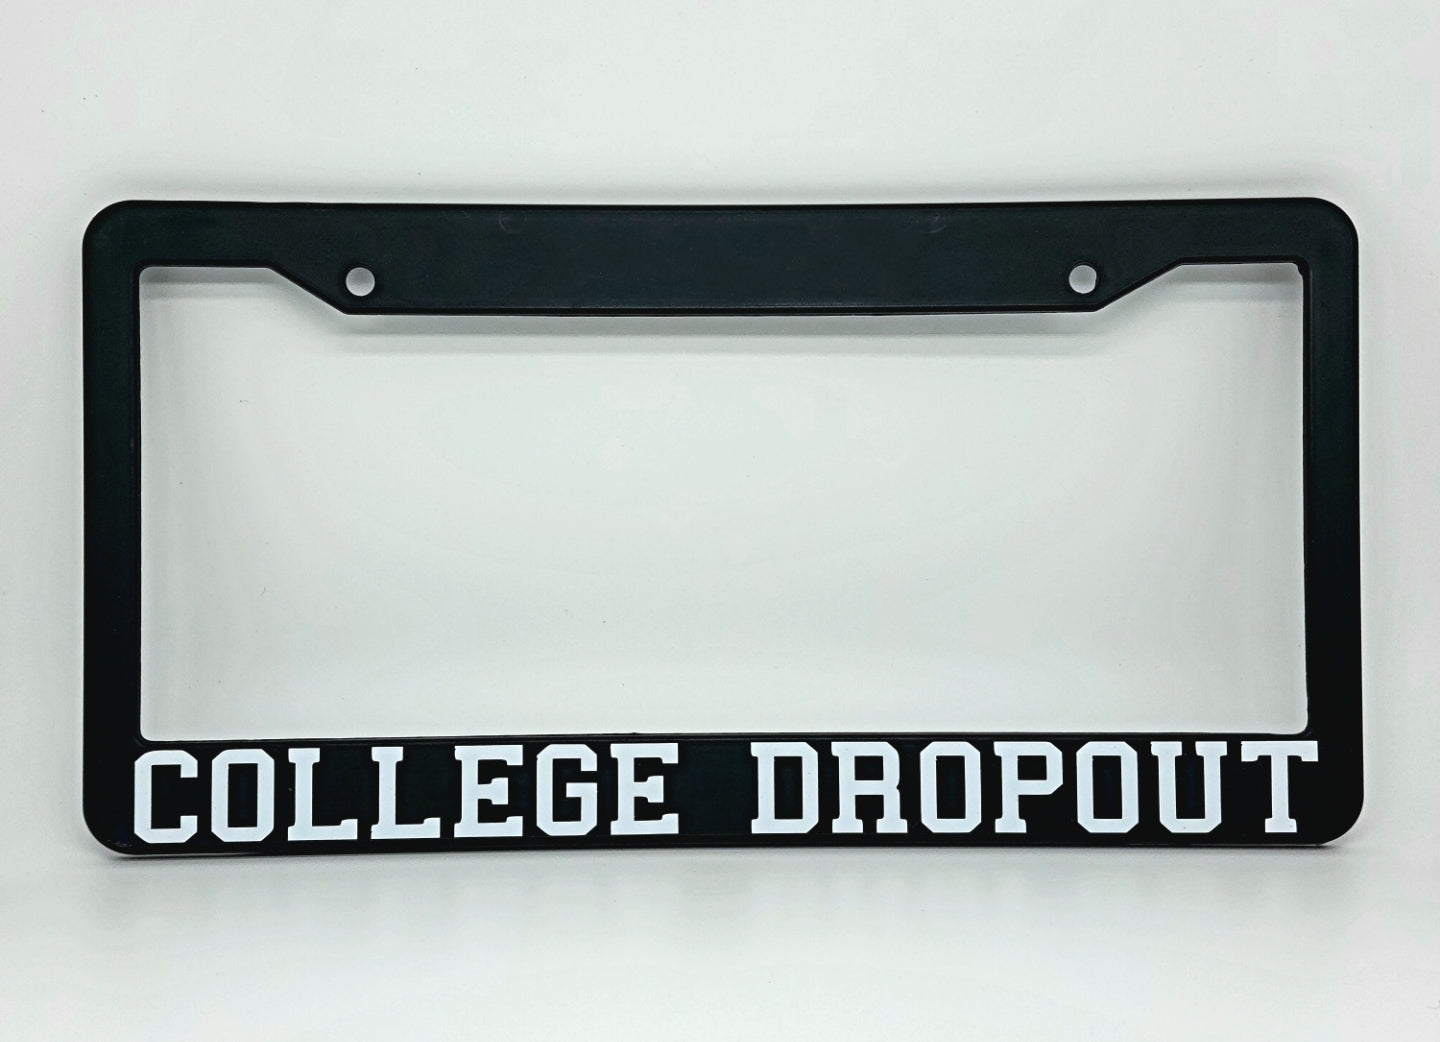 College Dropout (Plate Frame)